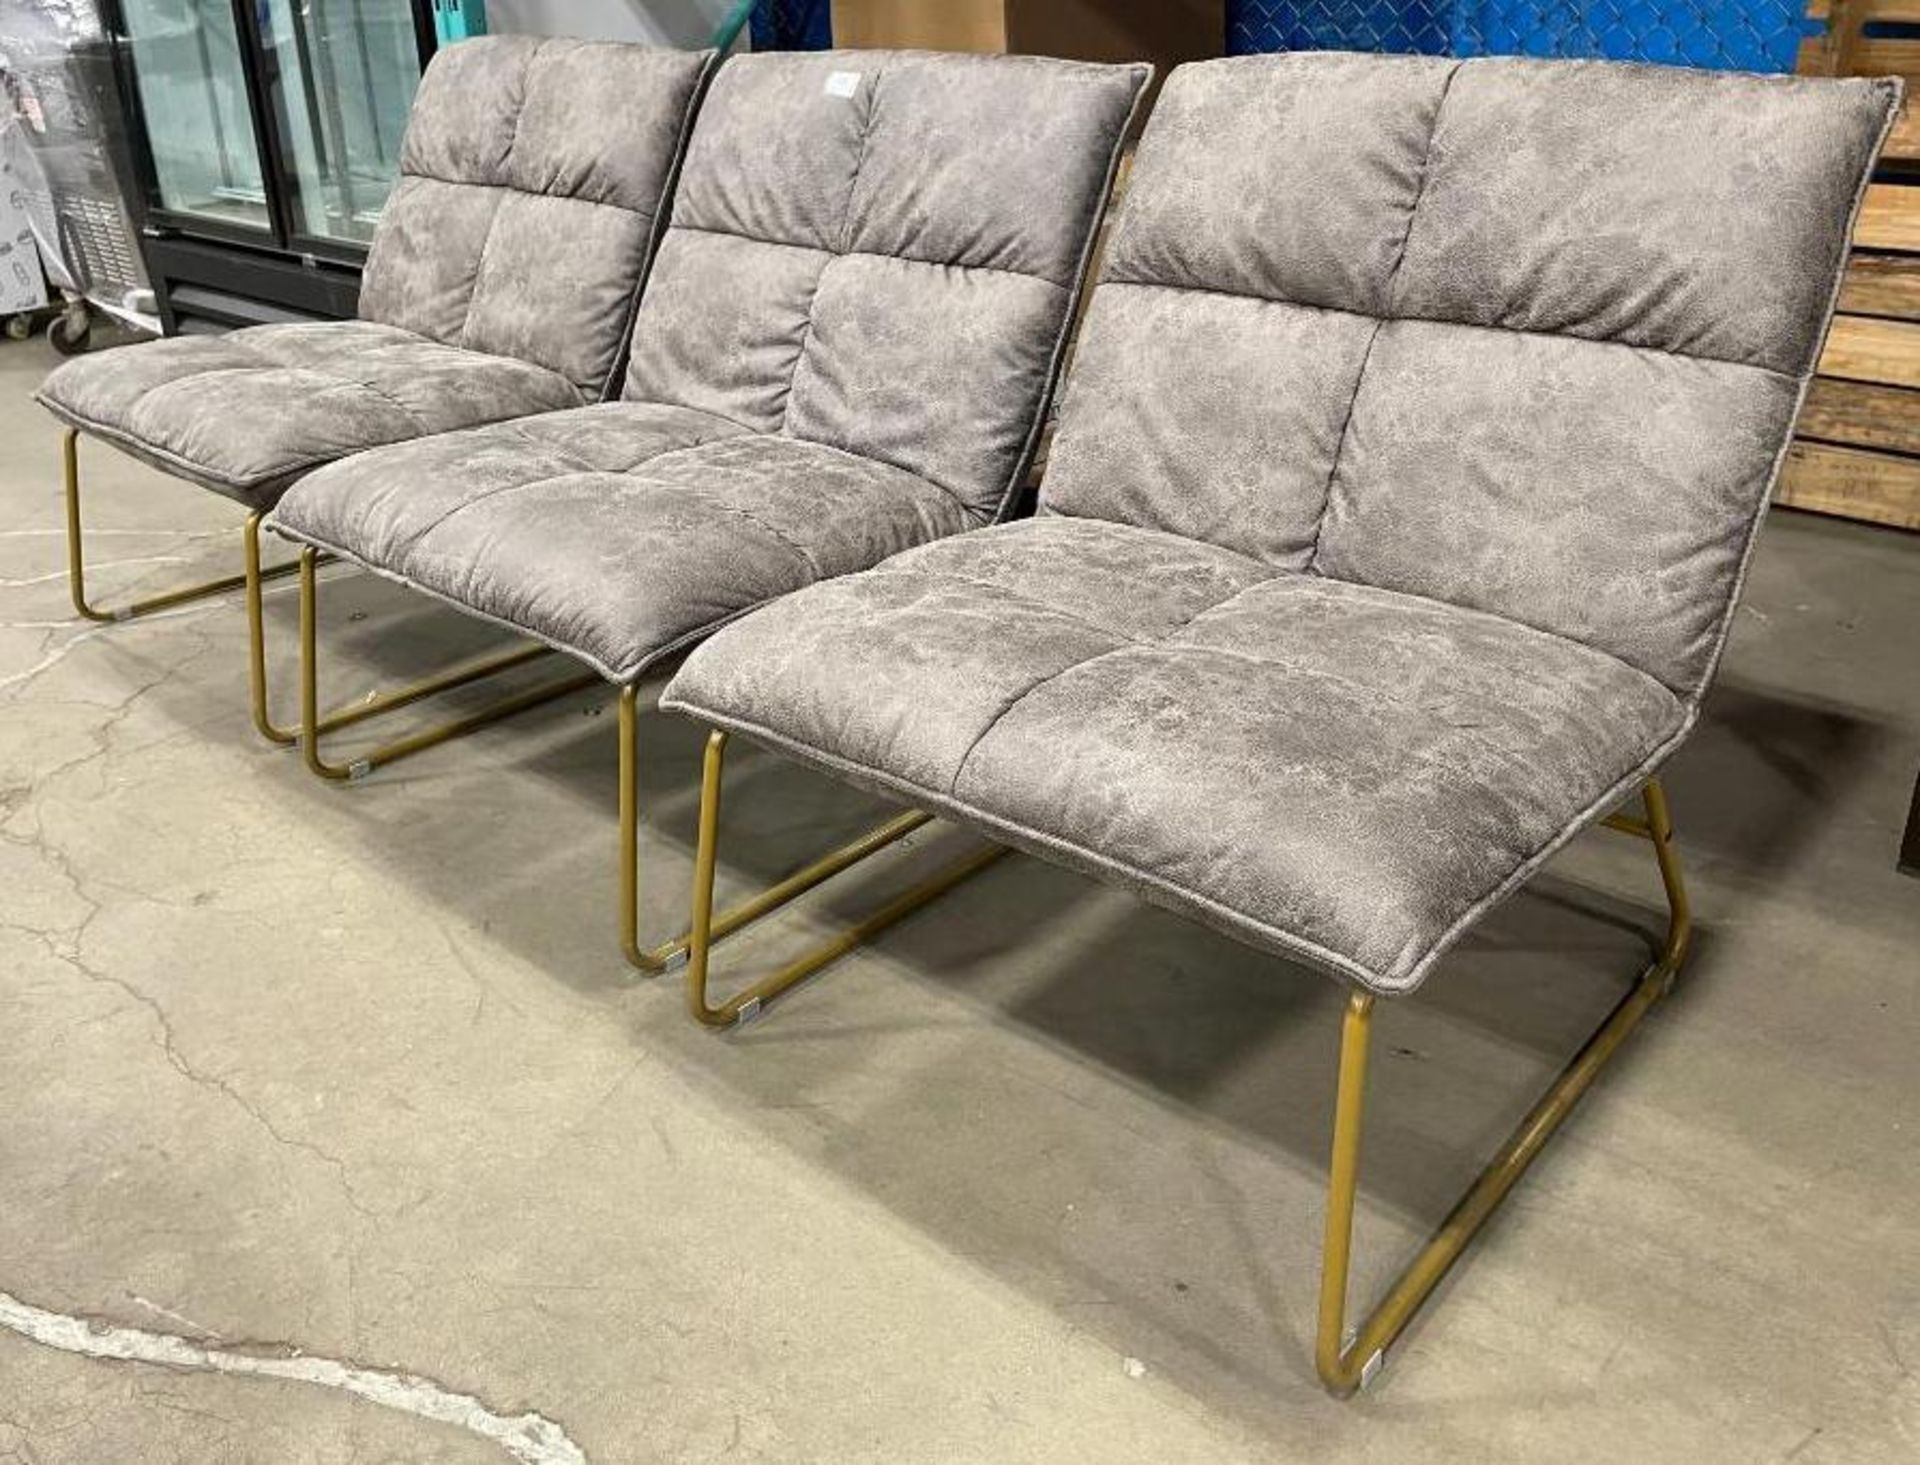 (3) GREY ACCENT CHAIRS